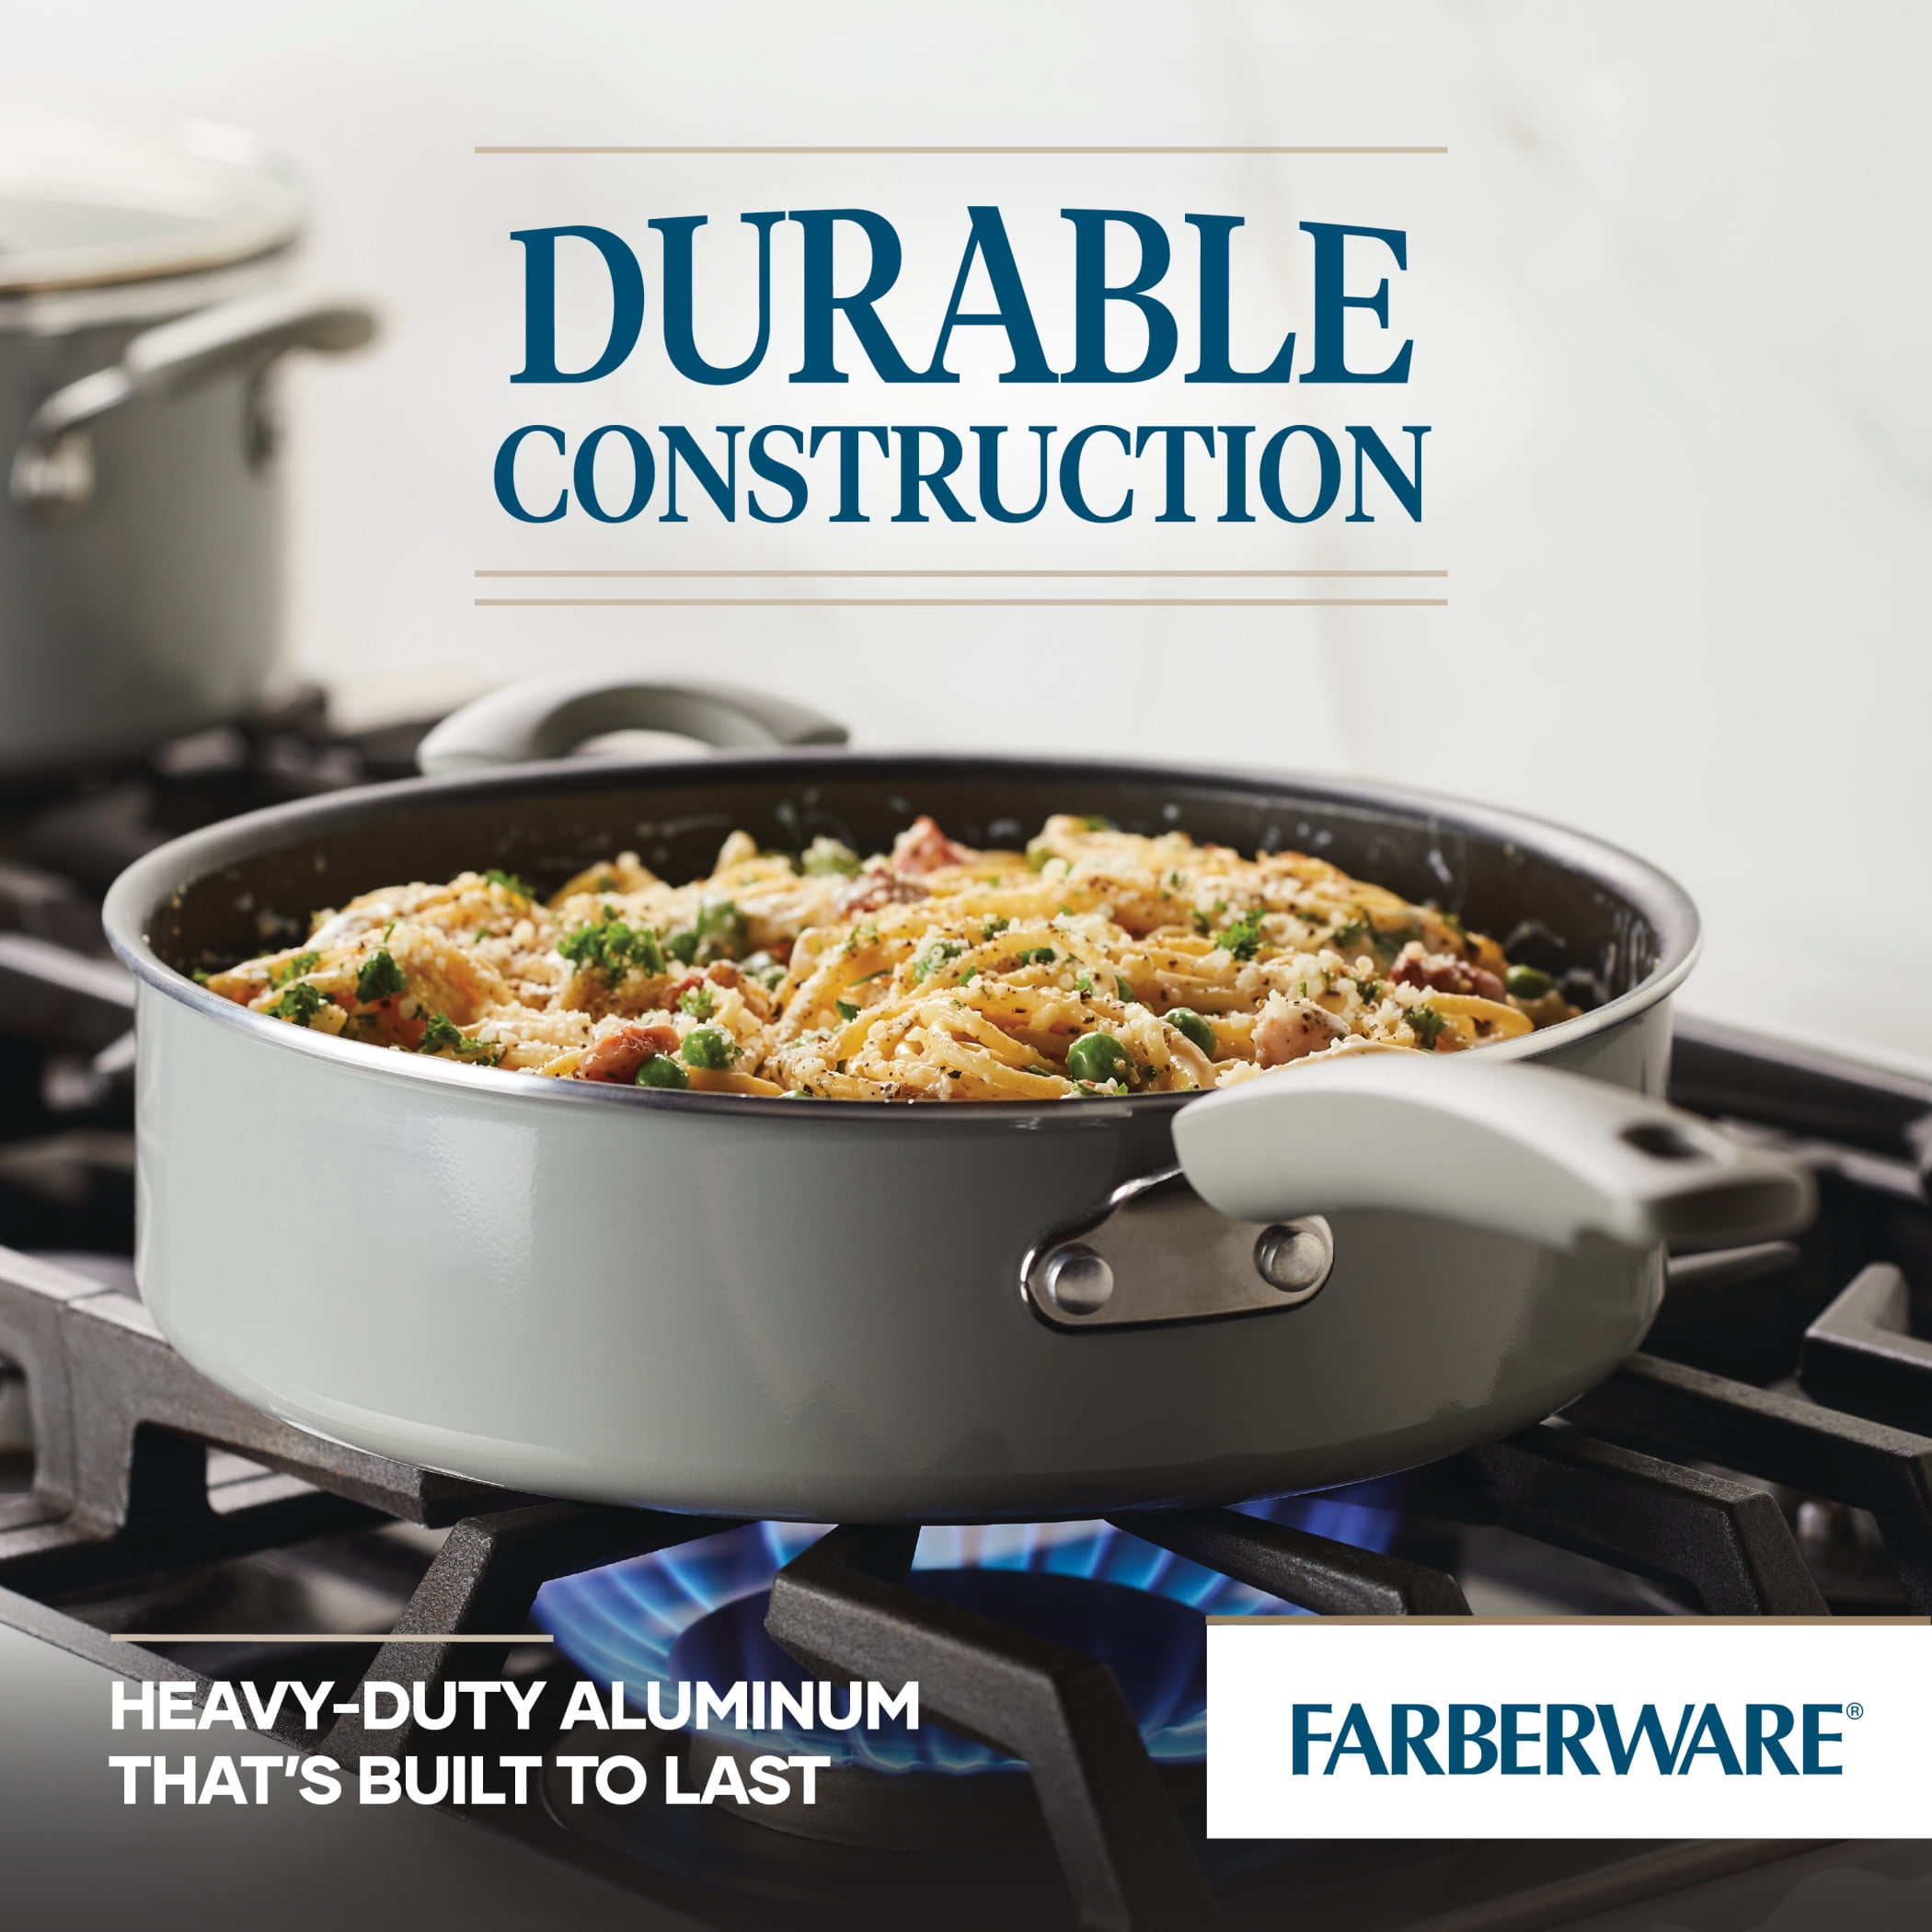 Farberware Classic Series Stainless Steel 4-1/2-Quart Covered Sauté Pan with Helper Handle